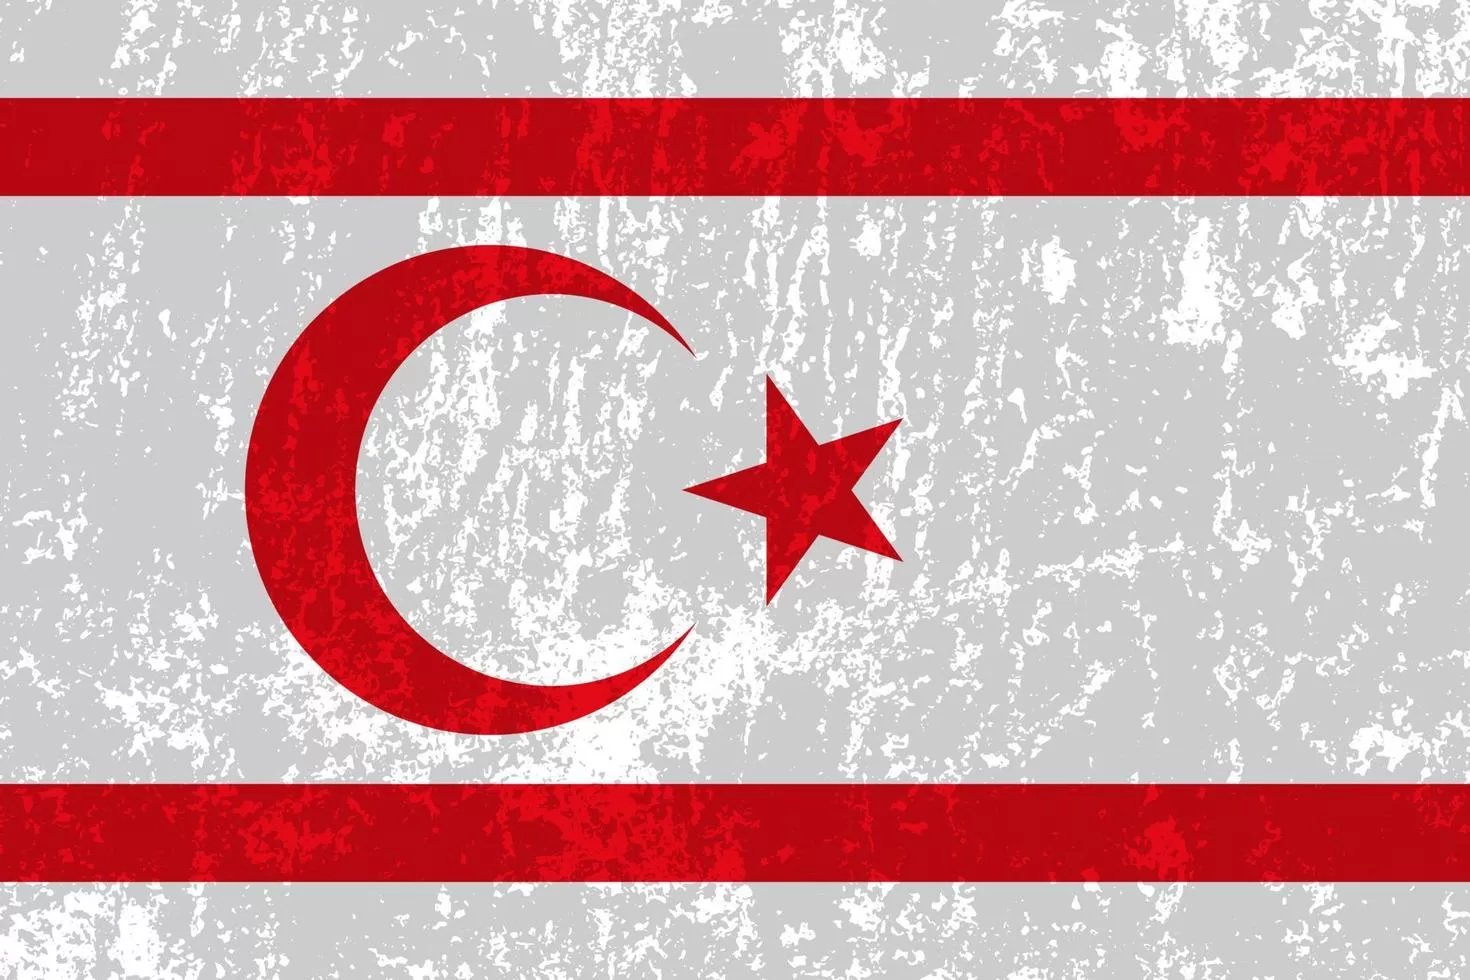 Facts about the flag of Northern Cyprus